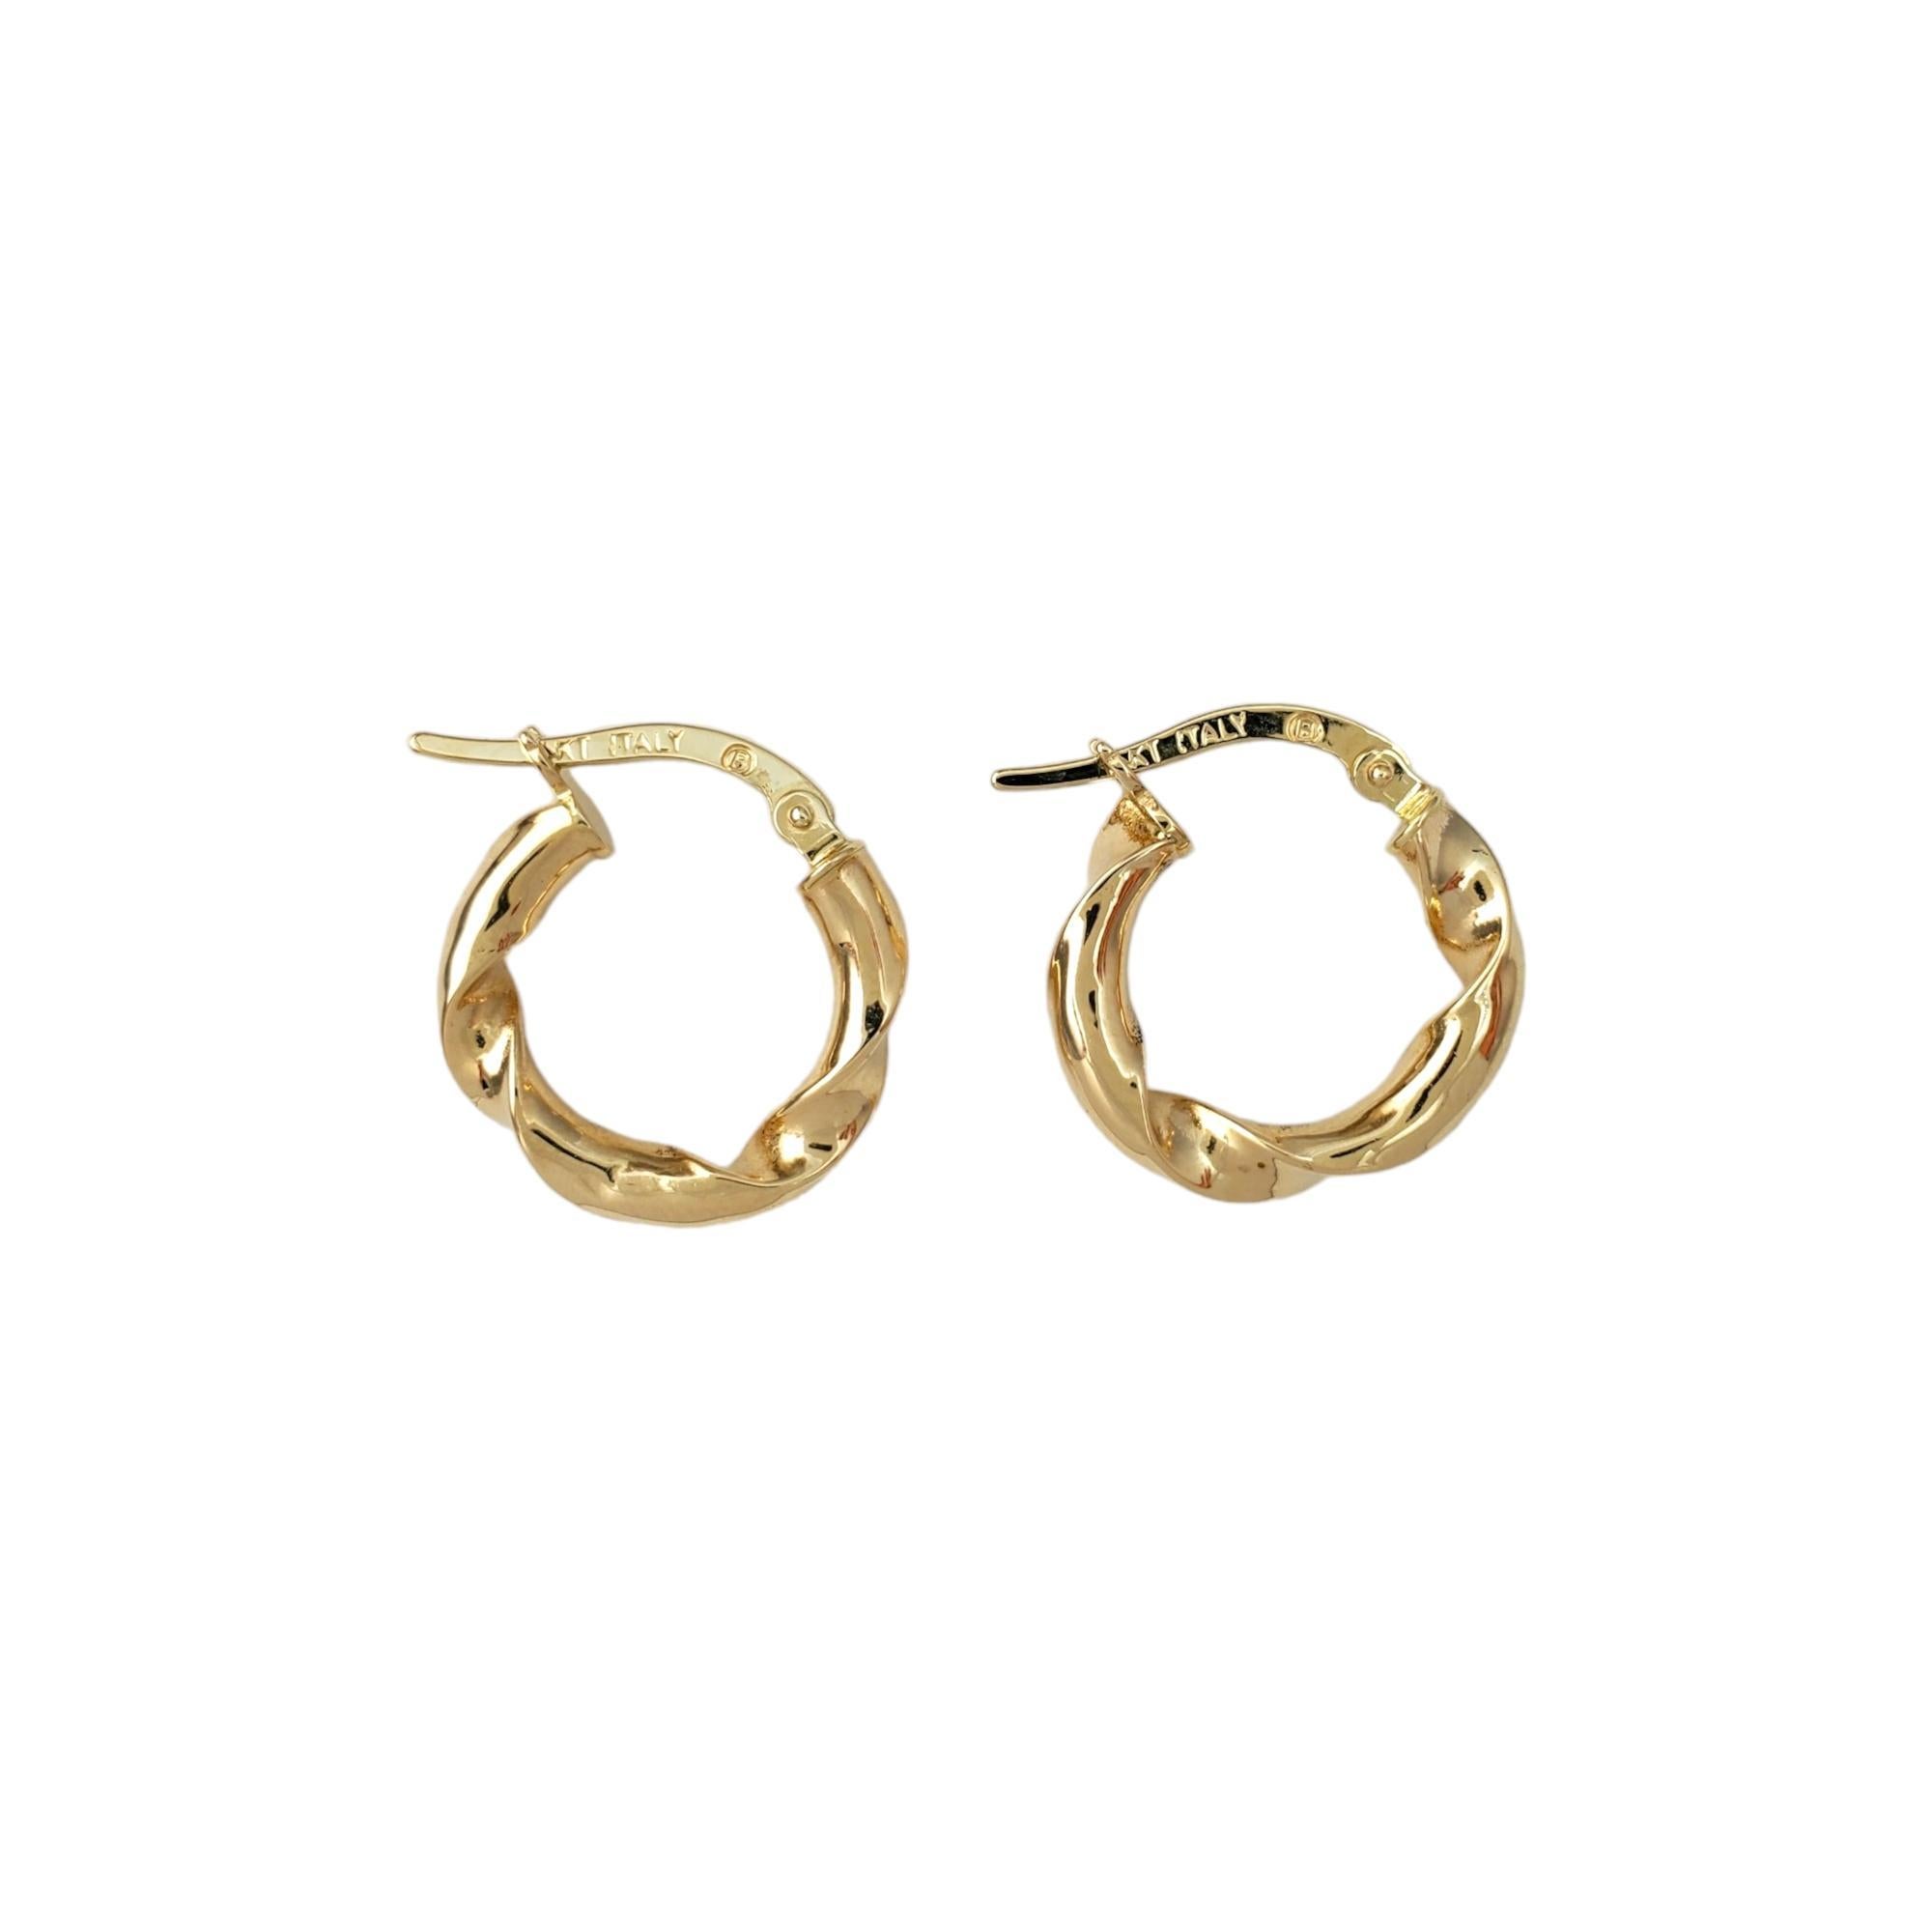 14K Yellow Gold Twist Hoop Earrings 

Elevate your style with a twist! 

Size:  17.5 mm X 2.8 mm X 2.5 mm

Weight:  0.7 dwt. /  1.2 gr.

Marked: 14KT ITALY 

Very good condition, professionally polished.

Will come packaged in a gift box or pouch